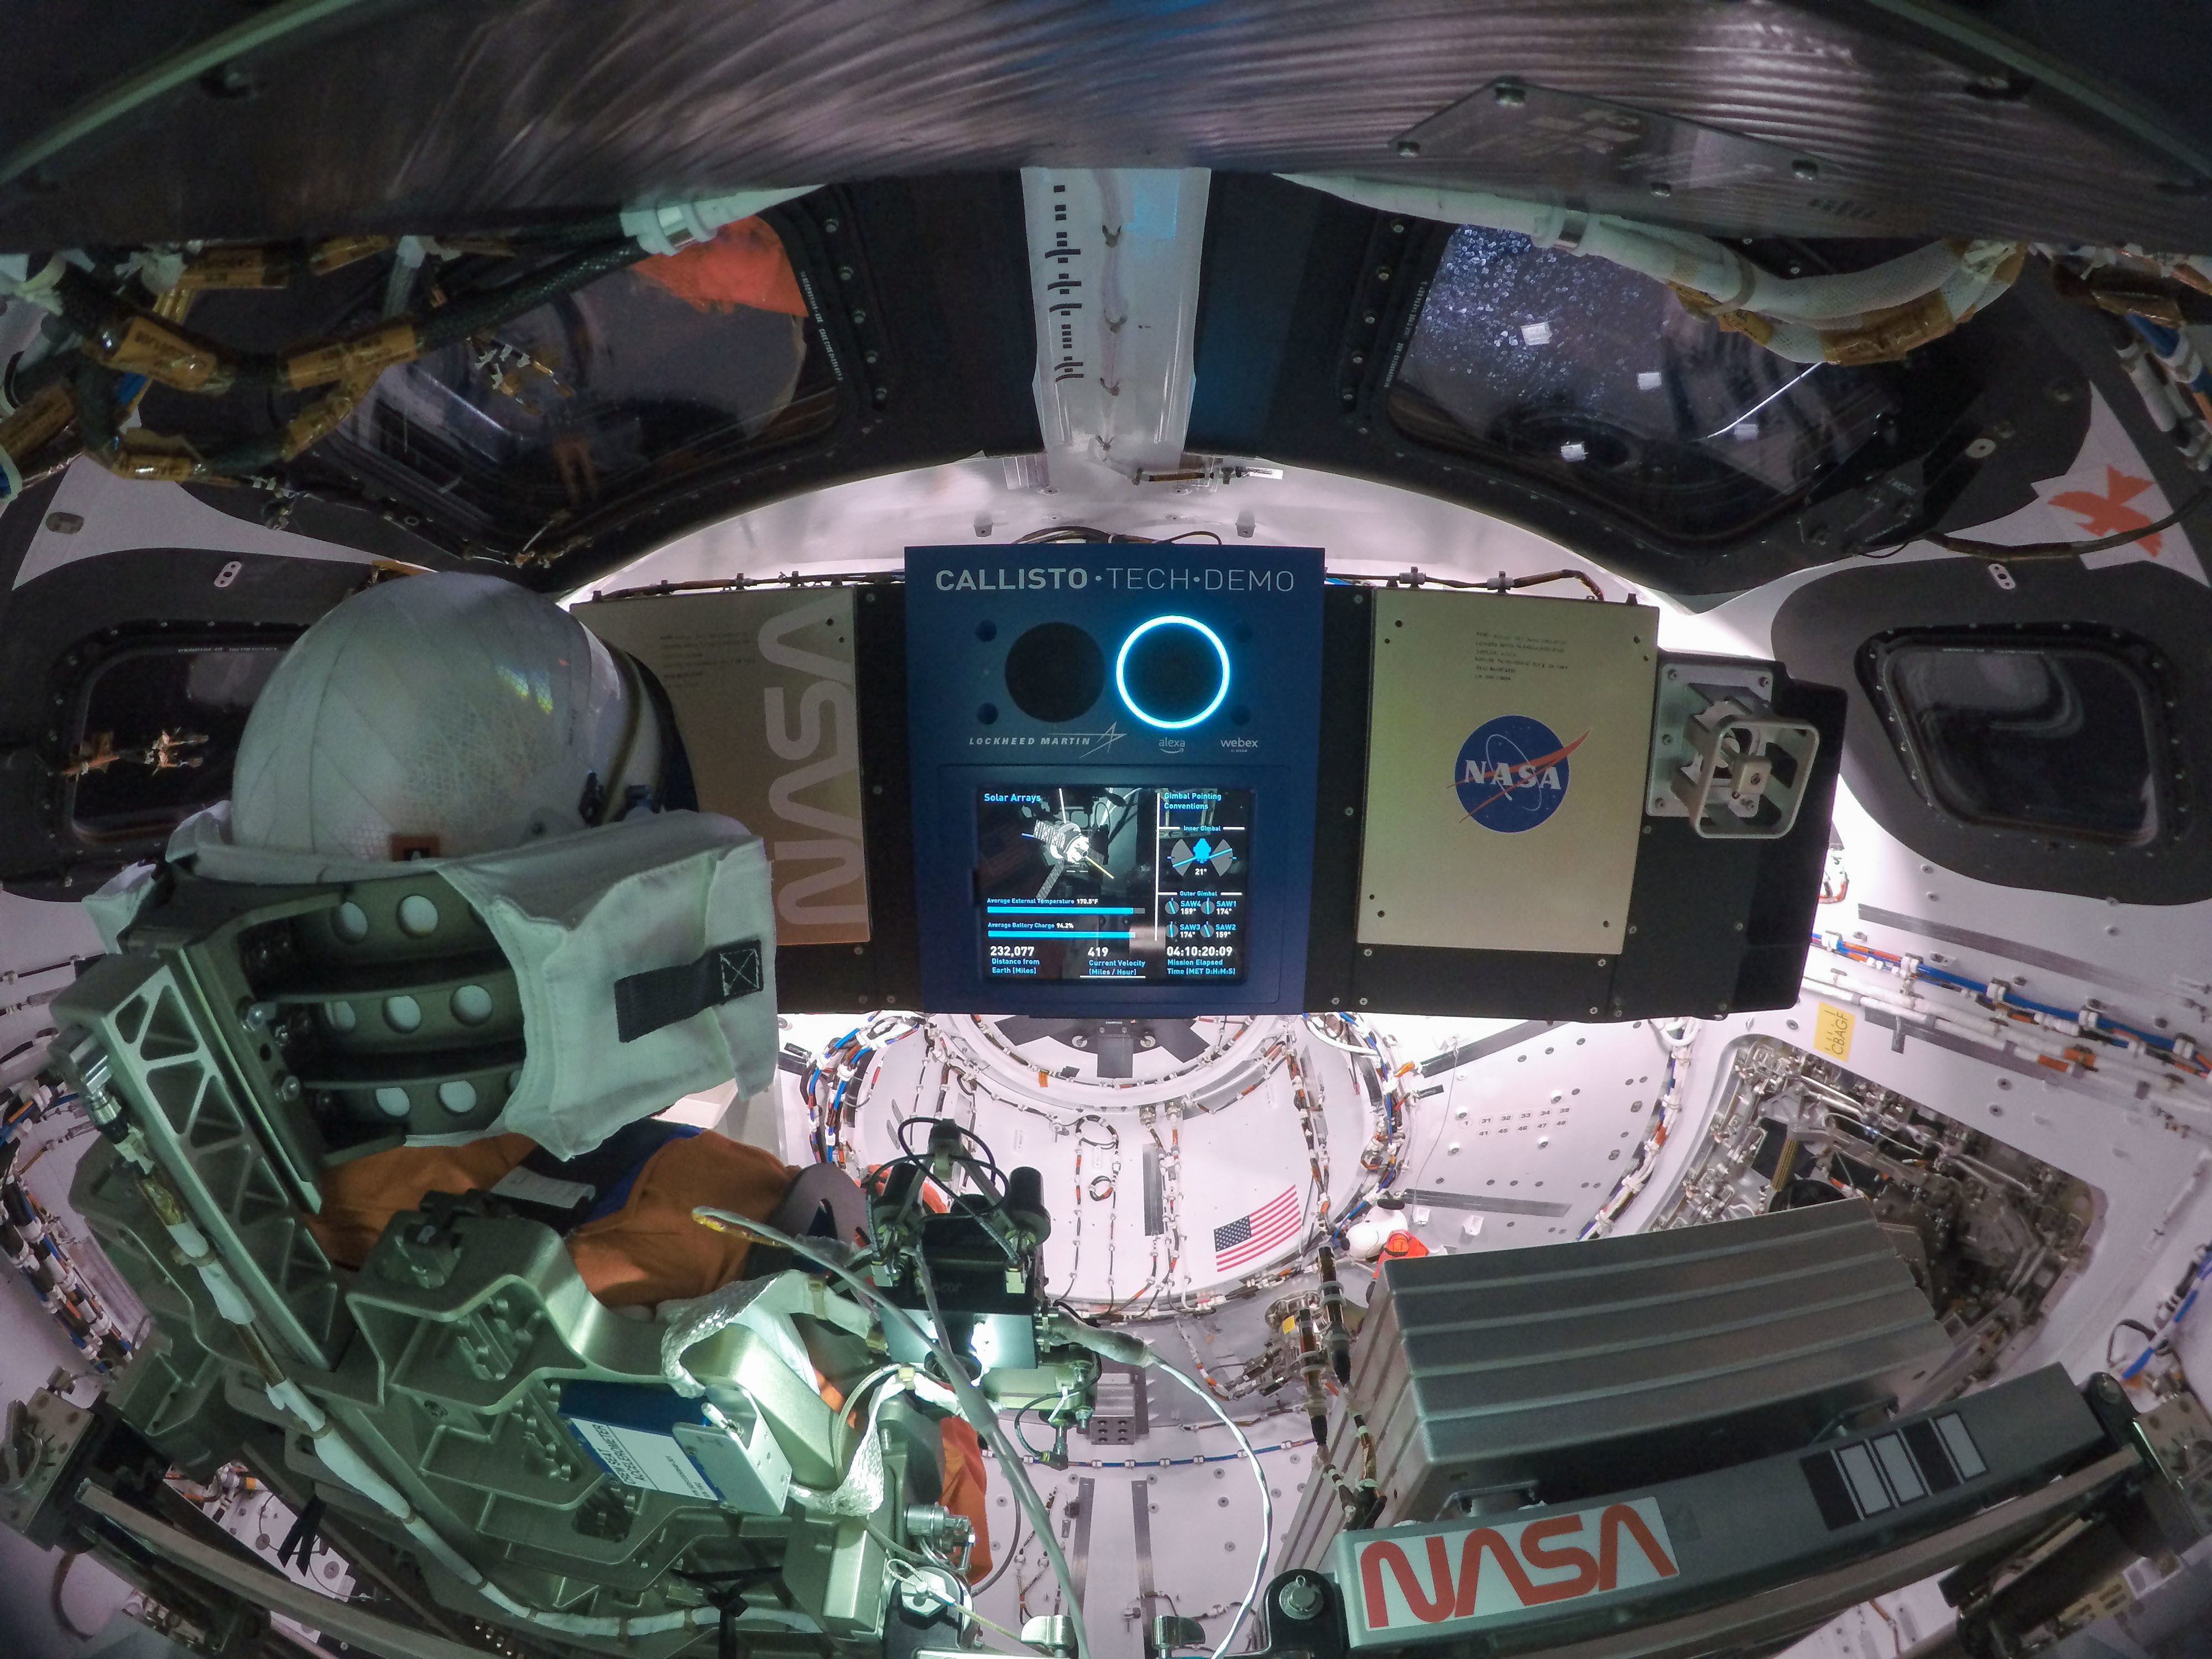 This high-resolution image captures the inside of the Orion crew module on flight day one of the Artemis I mission. At left is Commander Moonikin Campos, a purposeful passenger equipped with sensors to collect data that will help scientists and engineers understand the deep-space environment for future Artemis missions. At center is the Callisto payload, a technology demonstration of voice-activated audio and video technology from Lockheed Martin in collaboration with Amazon and Cisco. Below and to the right of Callisto is the Artemis I zero-gravity indicator, astronaut Snoopy.